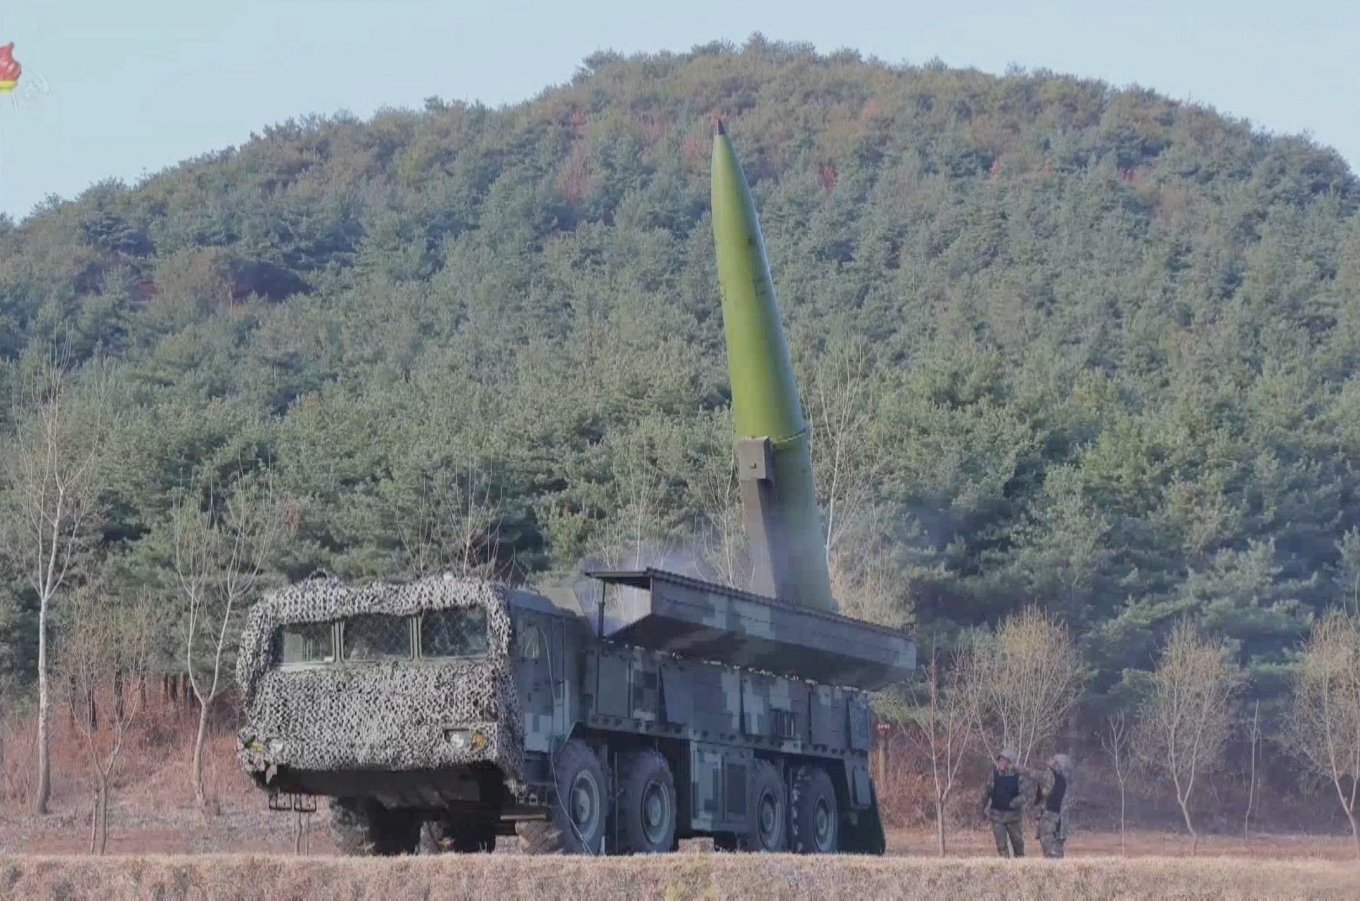 KN-23, KN-24, Scud: russia Received Ballistic Missiles From North Korea and  Used Them to Strike Ukraine | Defense Express